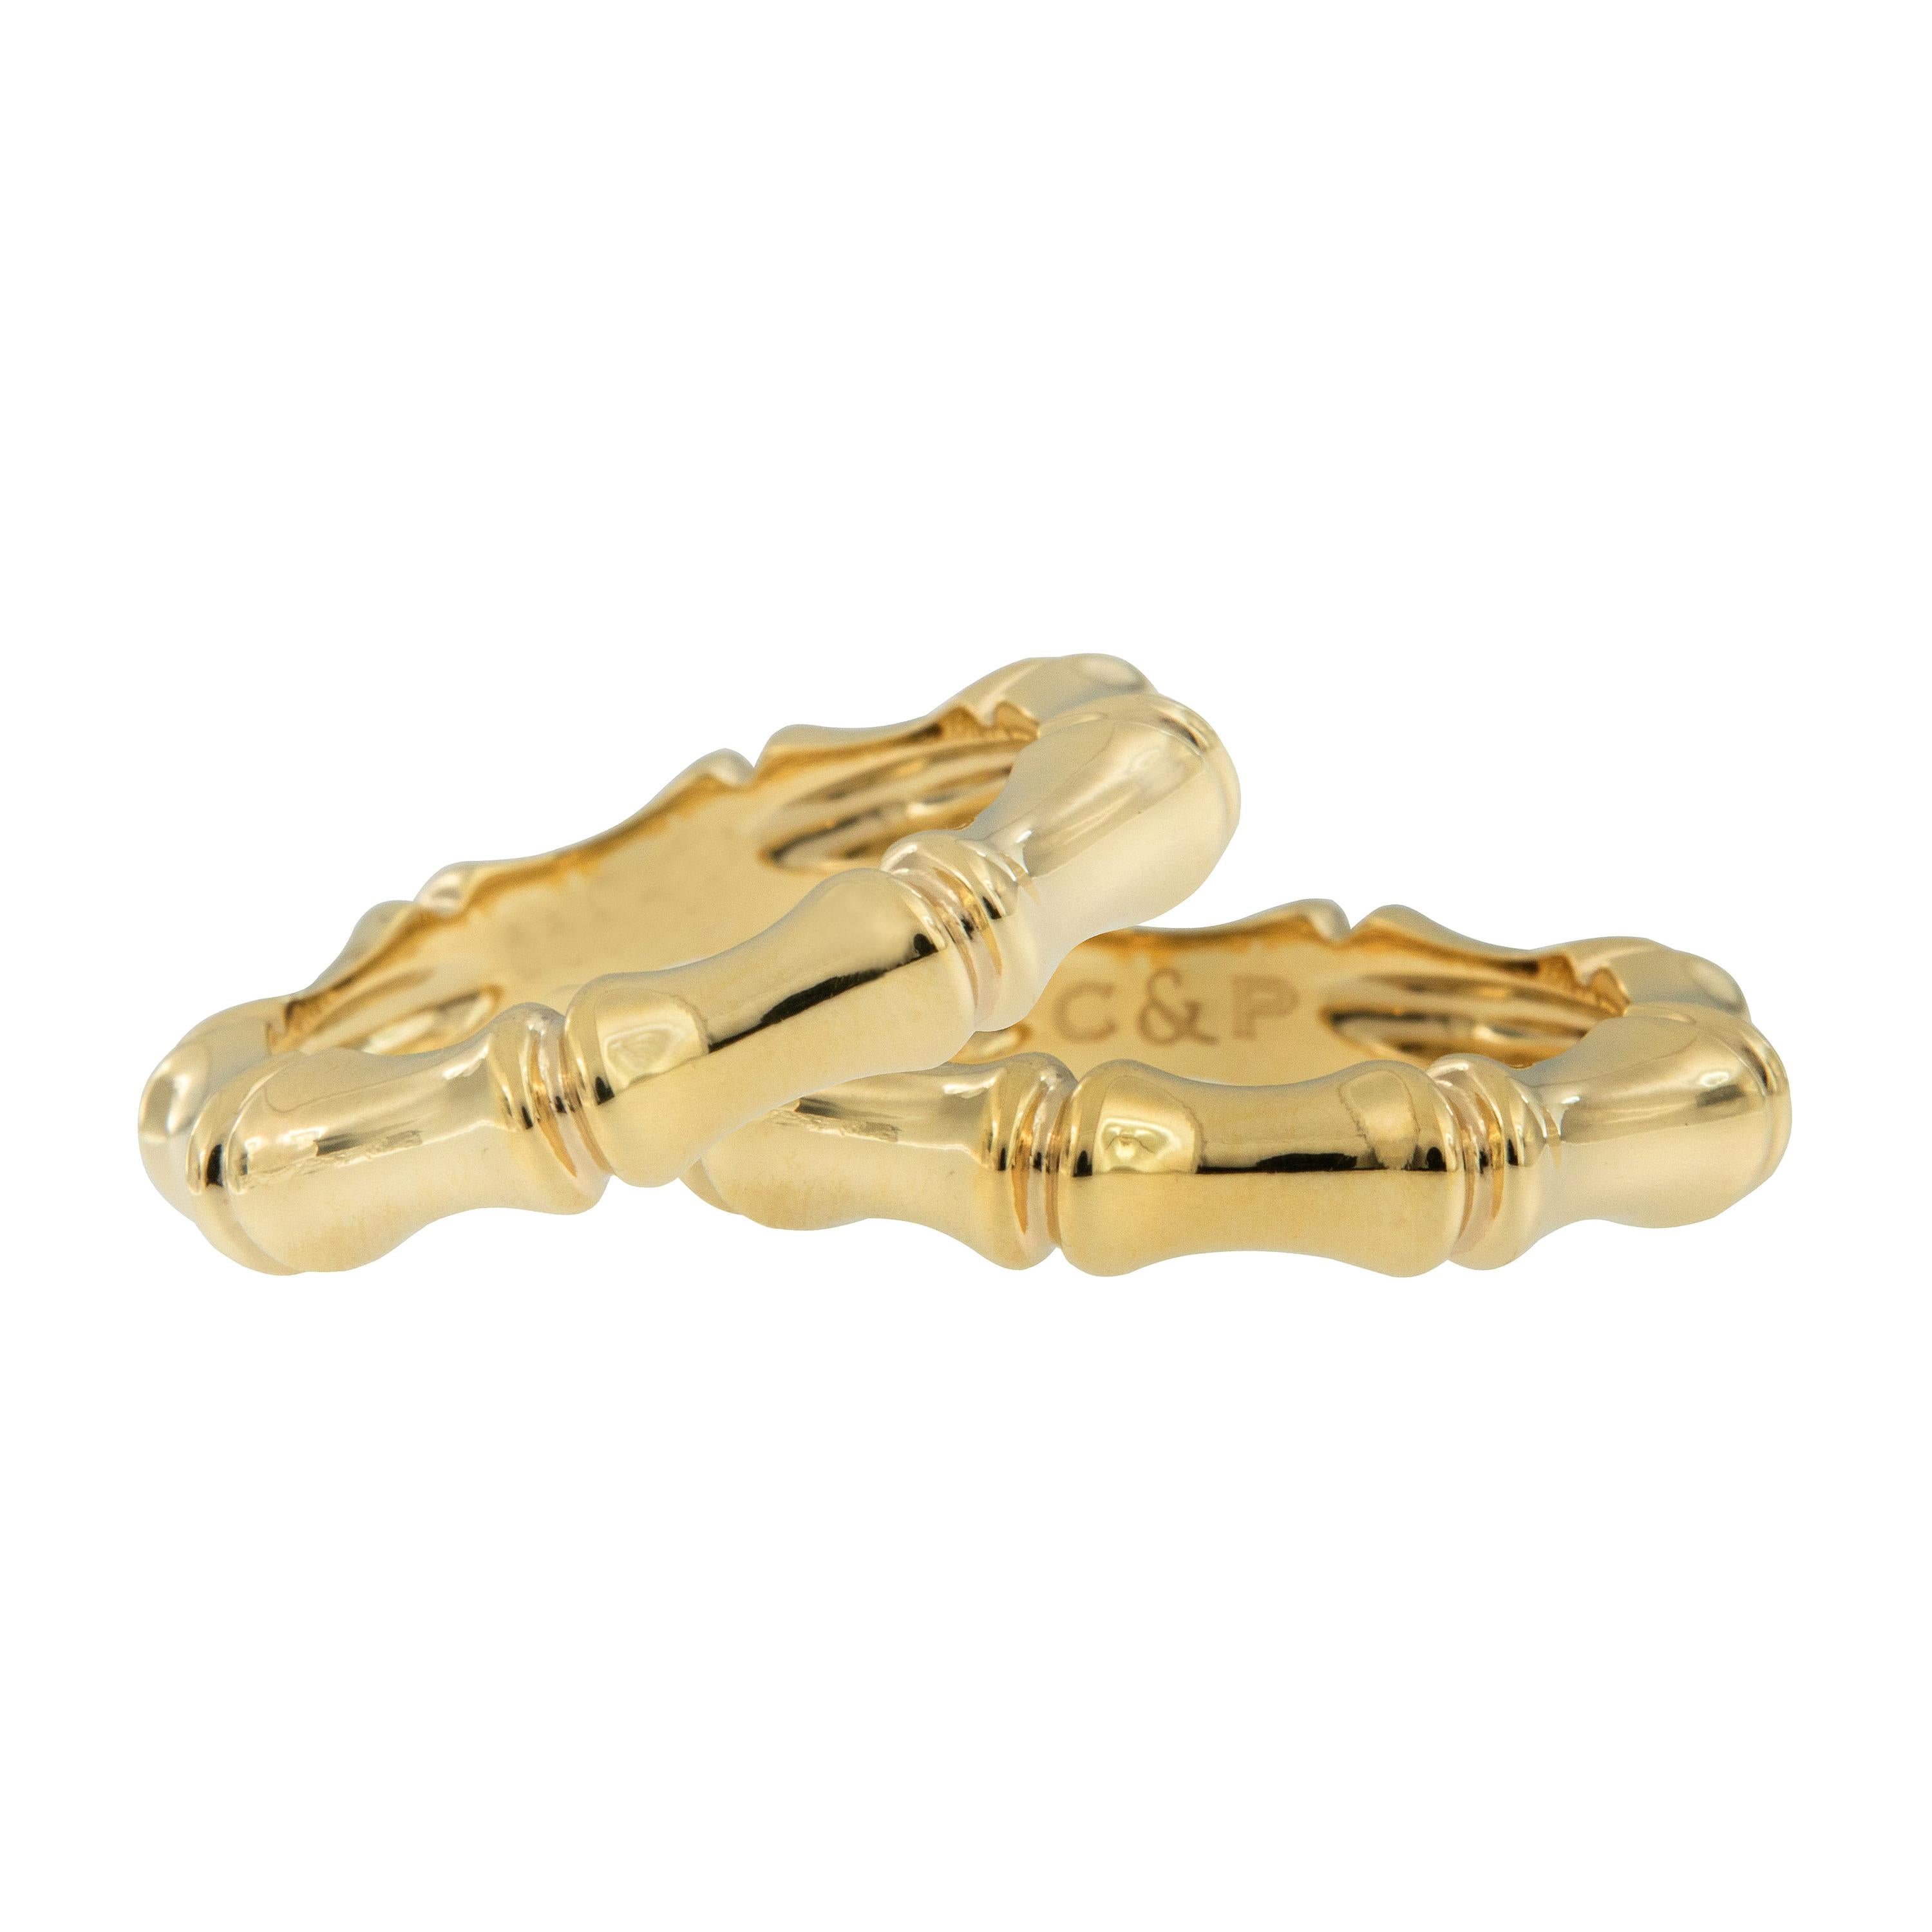 In Chinese culture, bamboo symbolizes strength, acceptance of the natural flow, continuous growth and openness to wisdom. What better way to be mindful of these attributes than wearing this iconic 18 karat yellow gold bamboo motif ring made in Italy